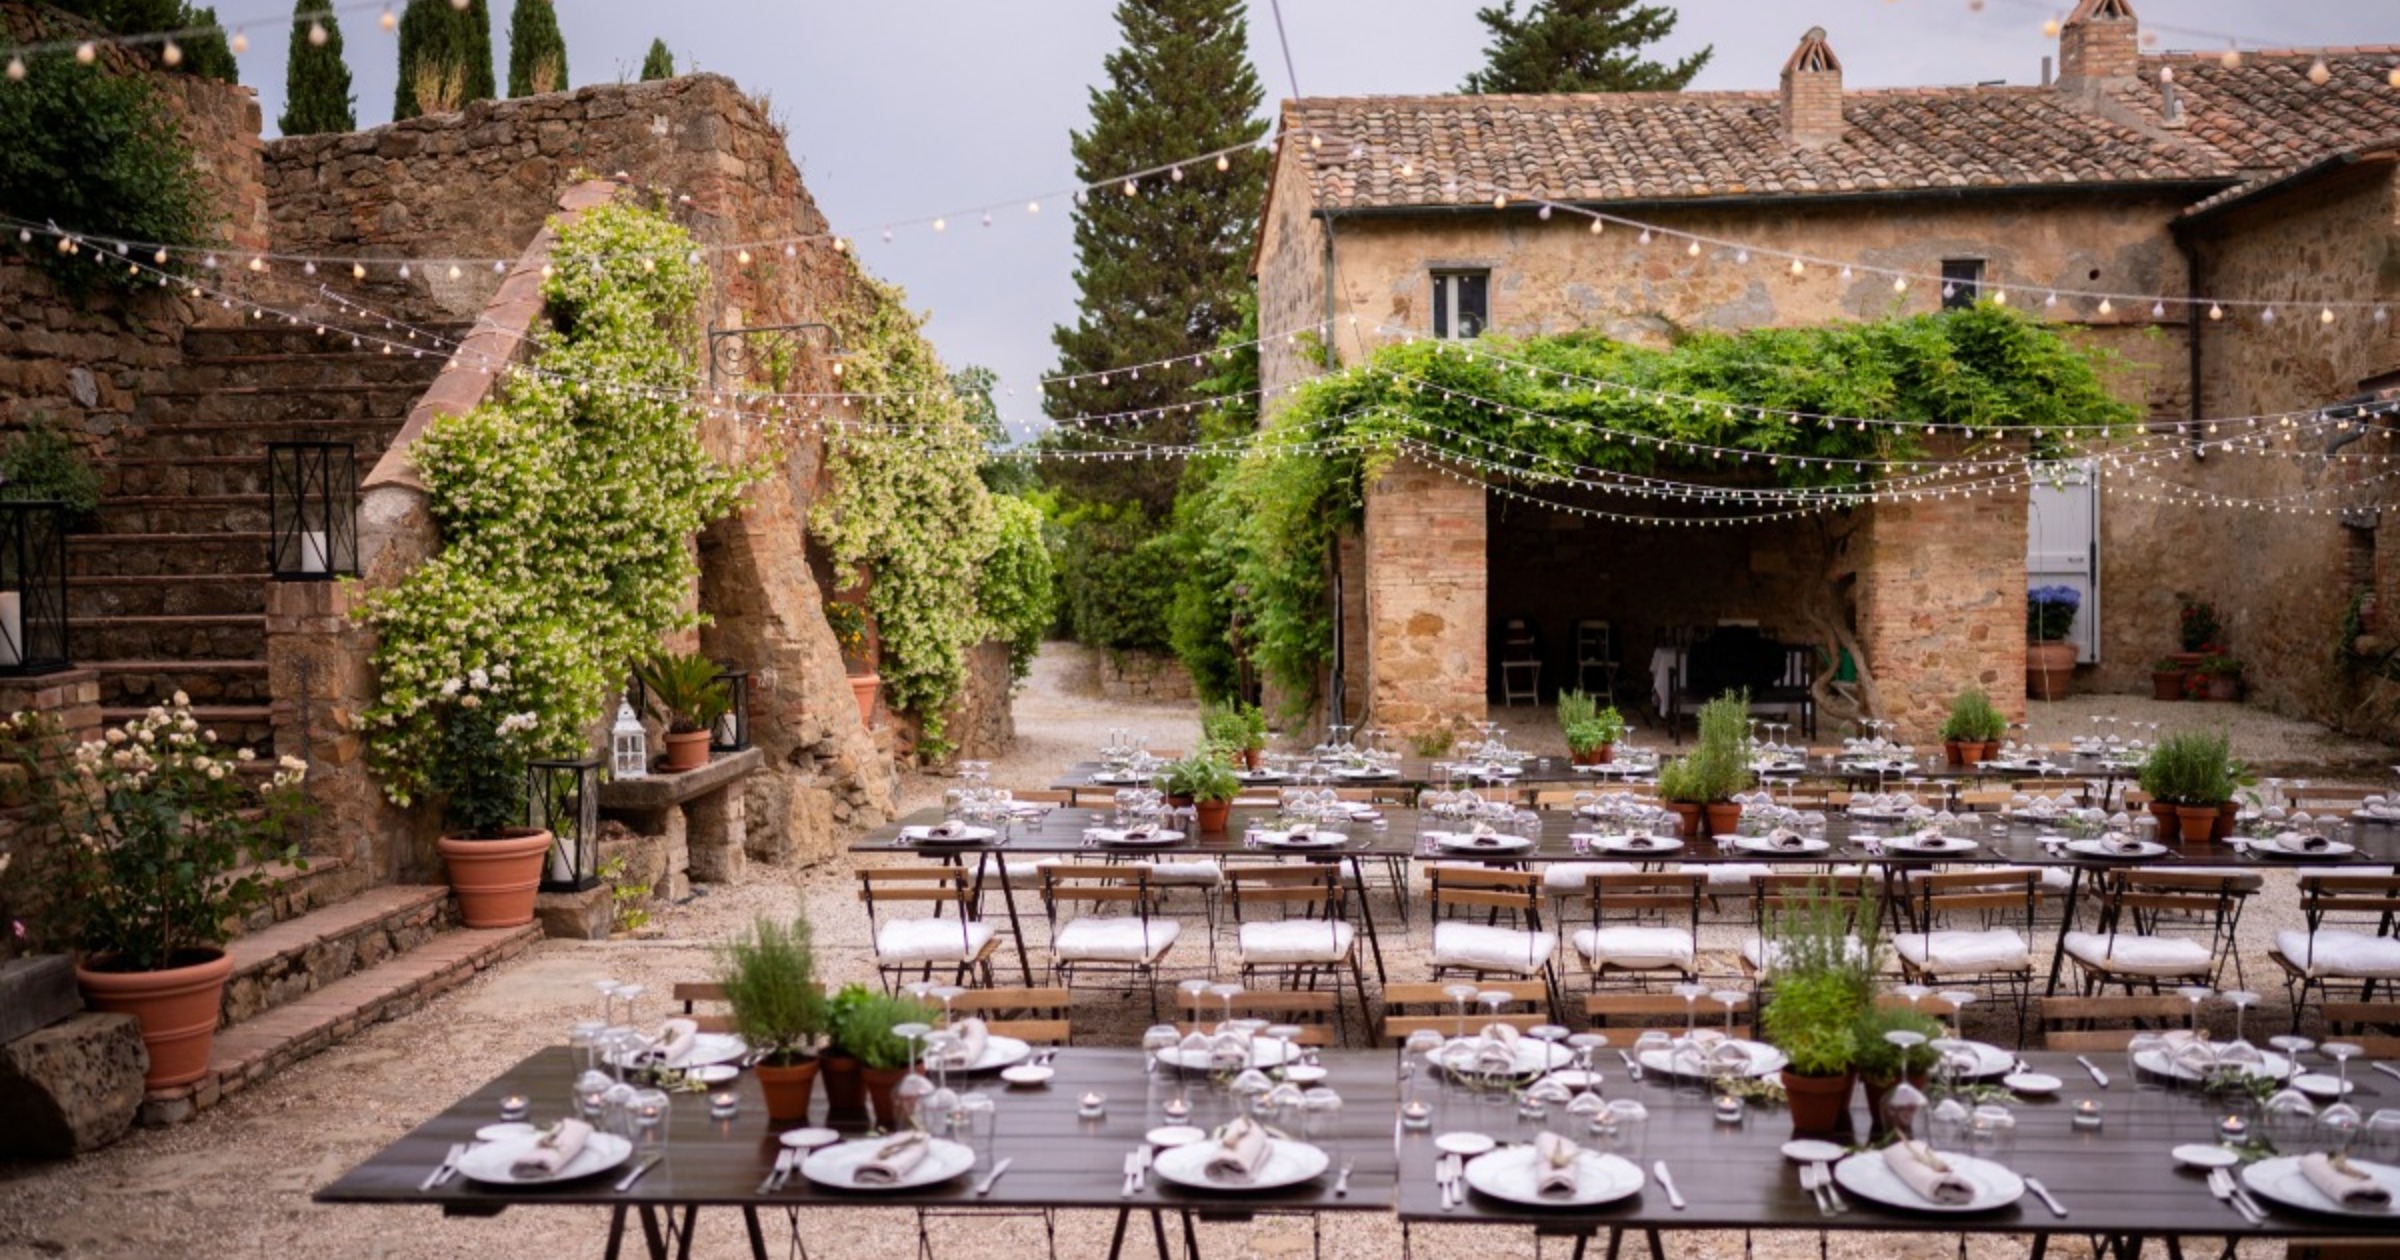 This Tuscan Wedding with a Twist Ended with a Pool Party